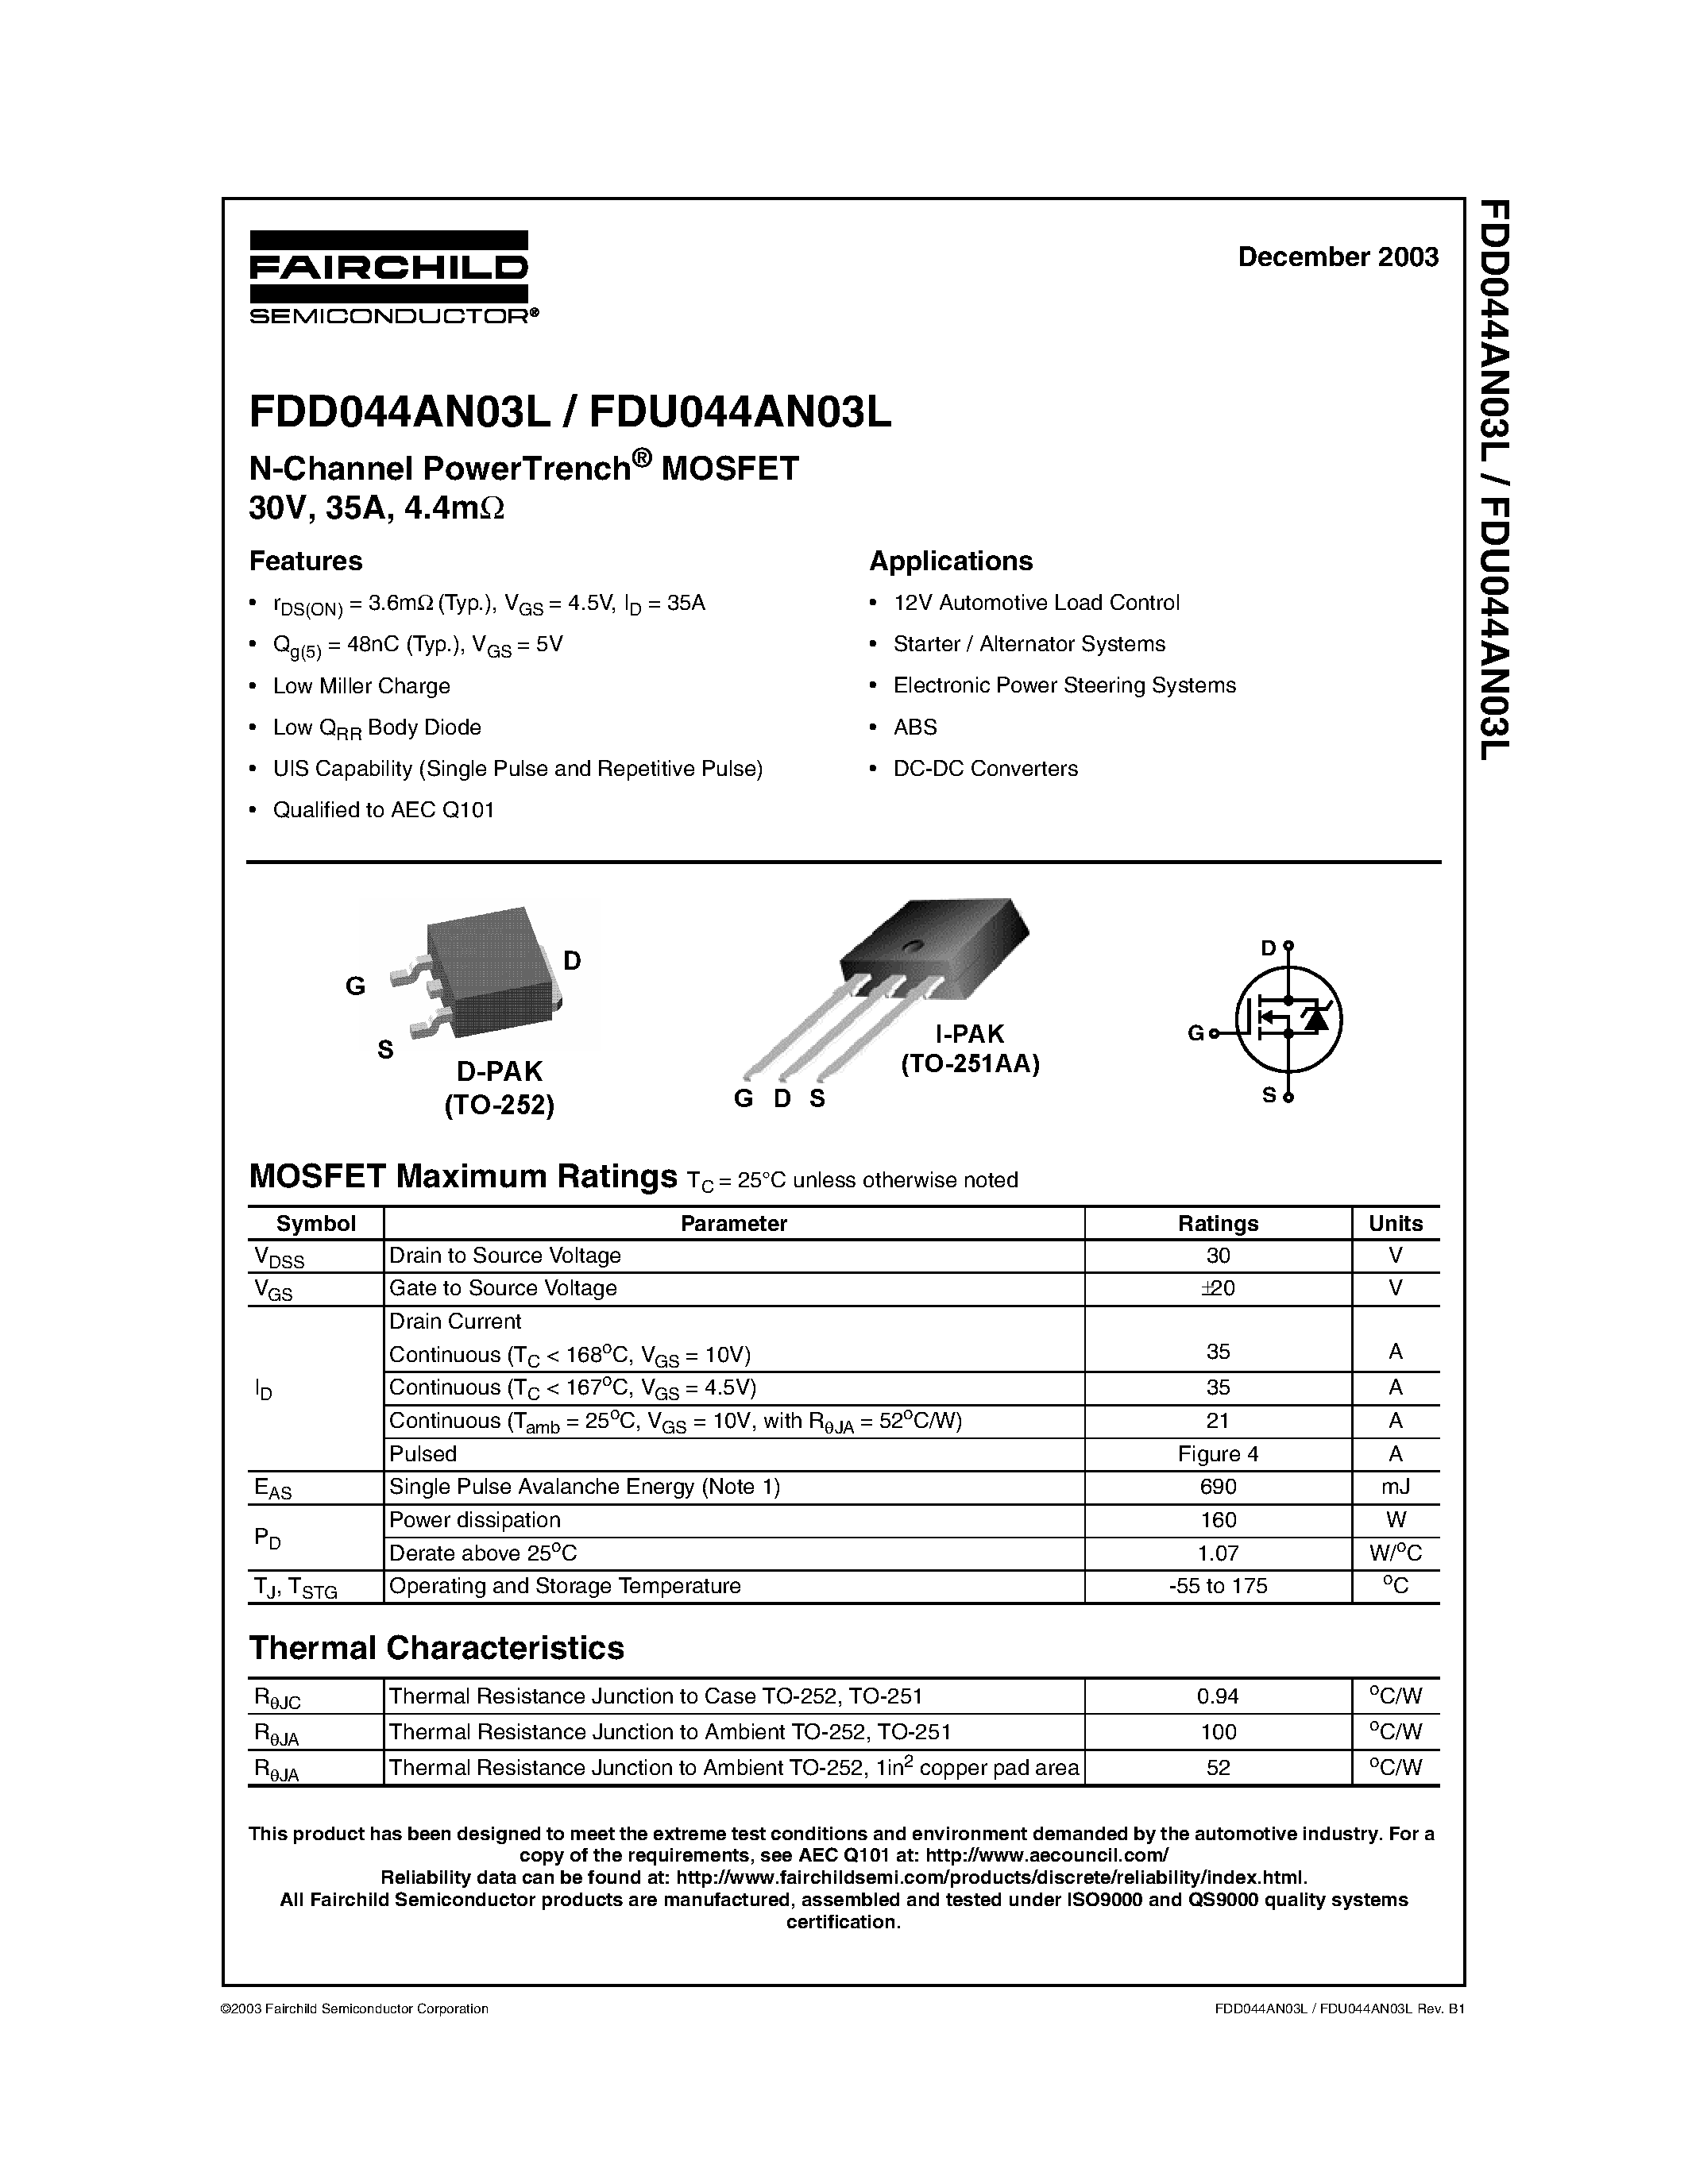 Datasheet FDD044AN03L - N-Channel PowerTrench MOSFET page 1